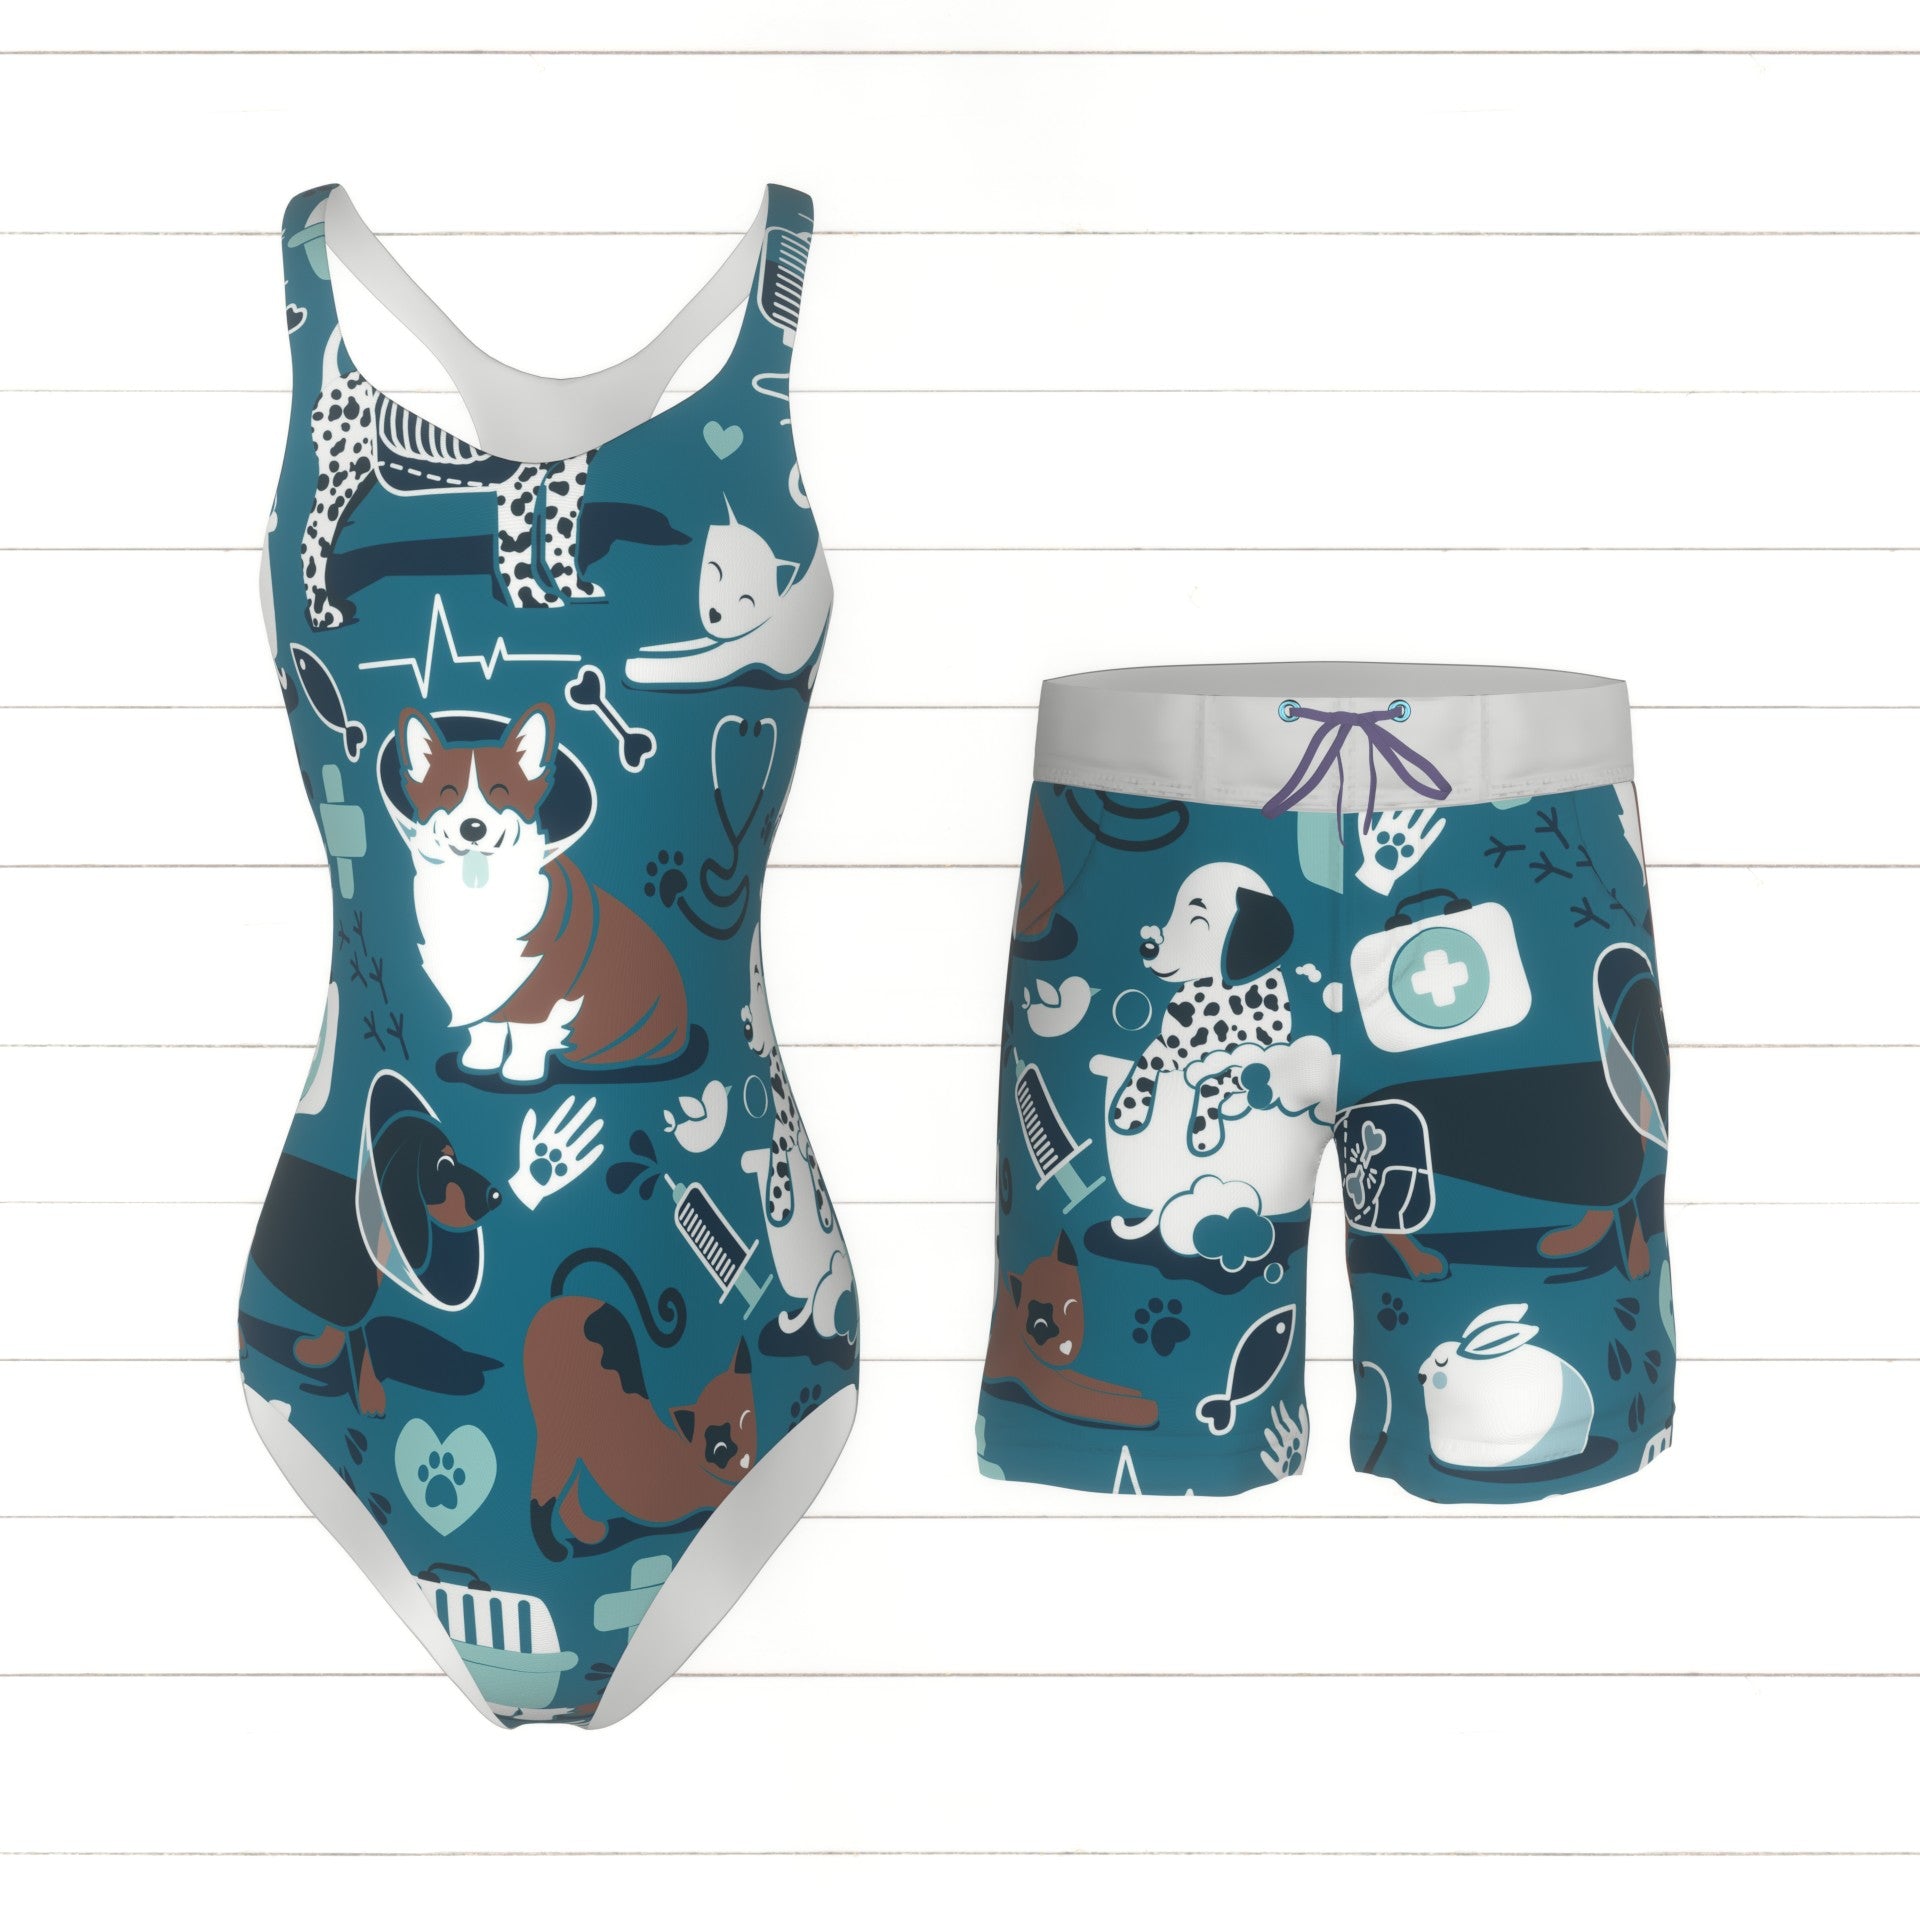 Veterinary medicine, happy and healthy friends // turquoise background aqua details navy blue white and brown cats dogs and other animals Fabric, Raspberry Creek Fabrics